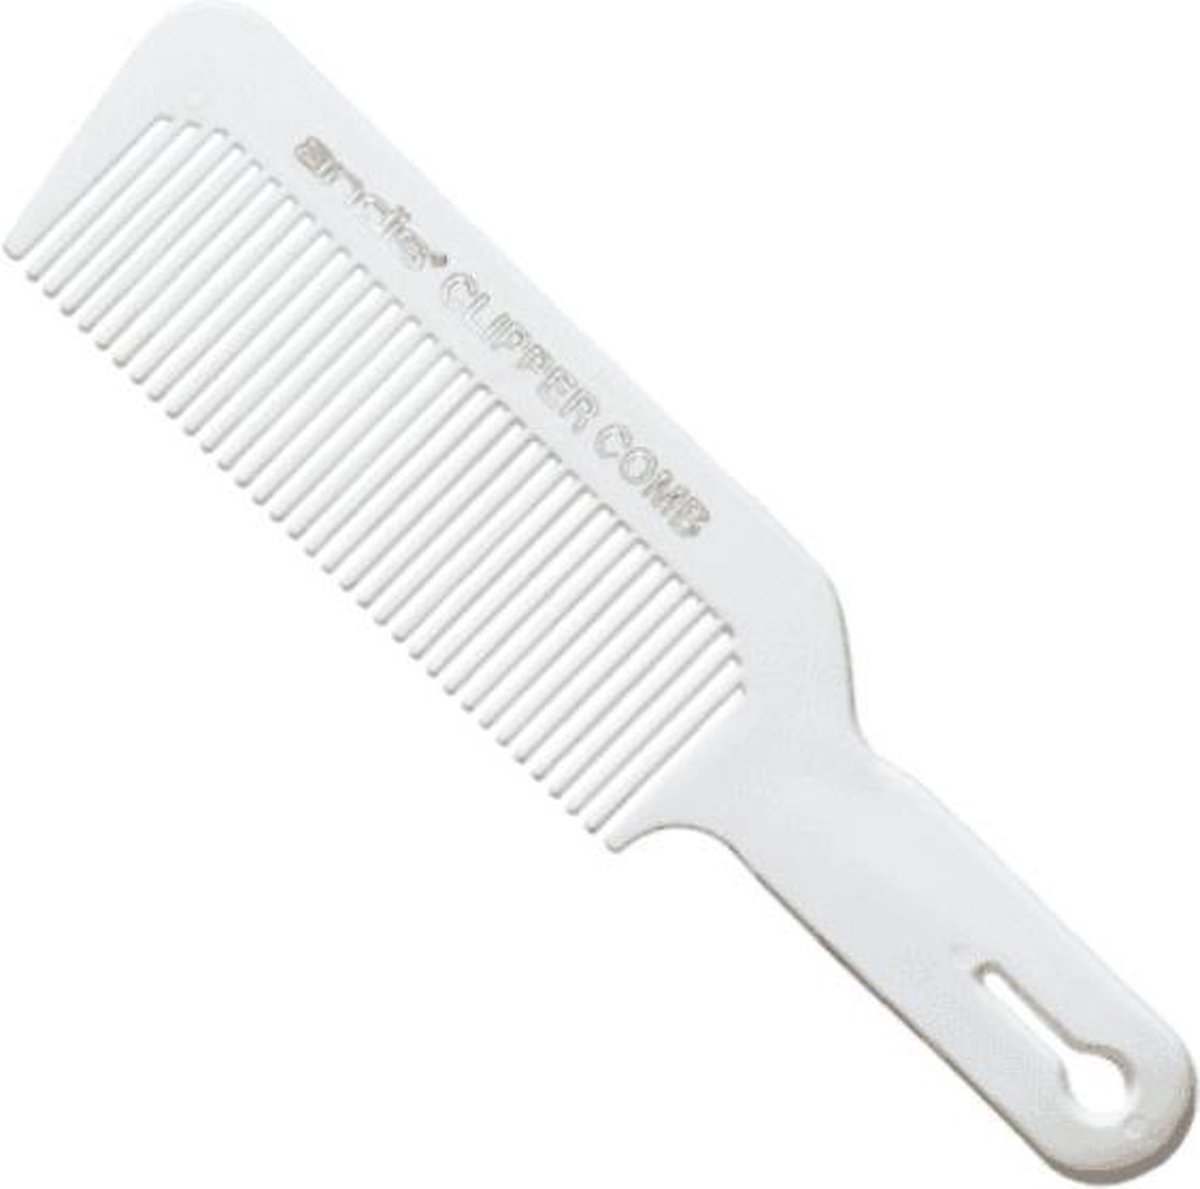 Andis Clipper Comb Wit